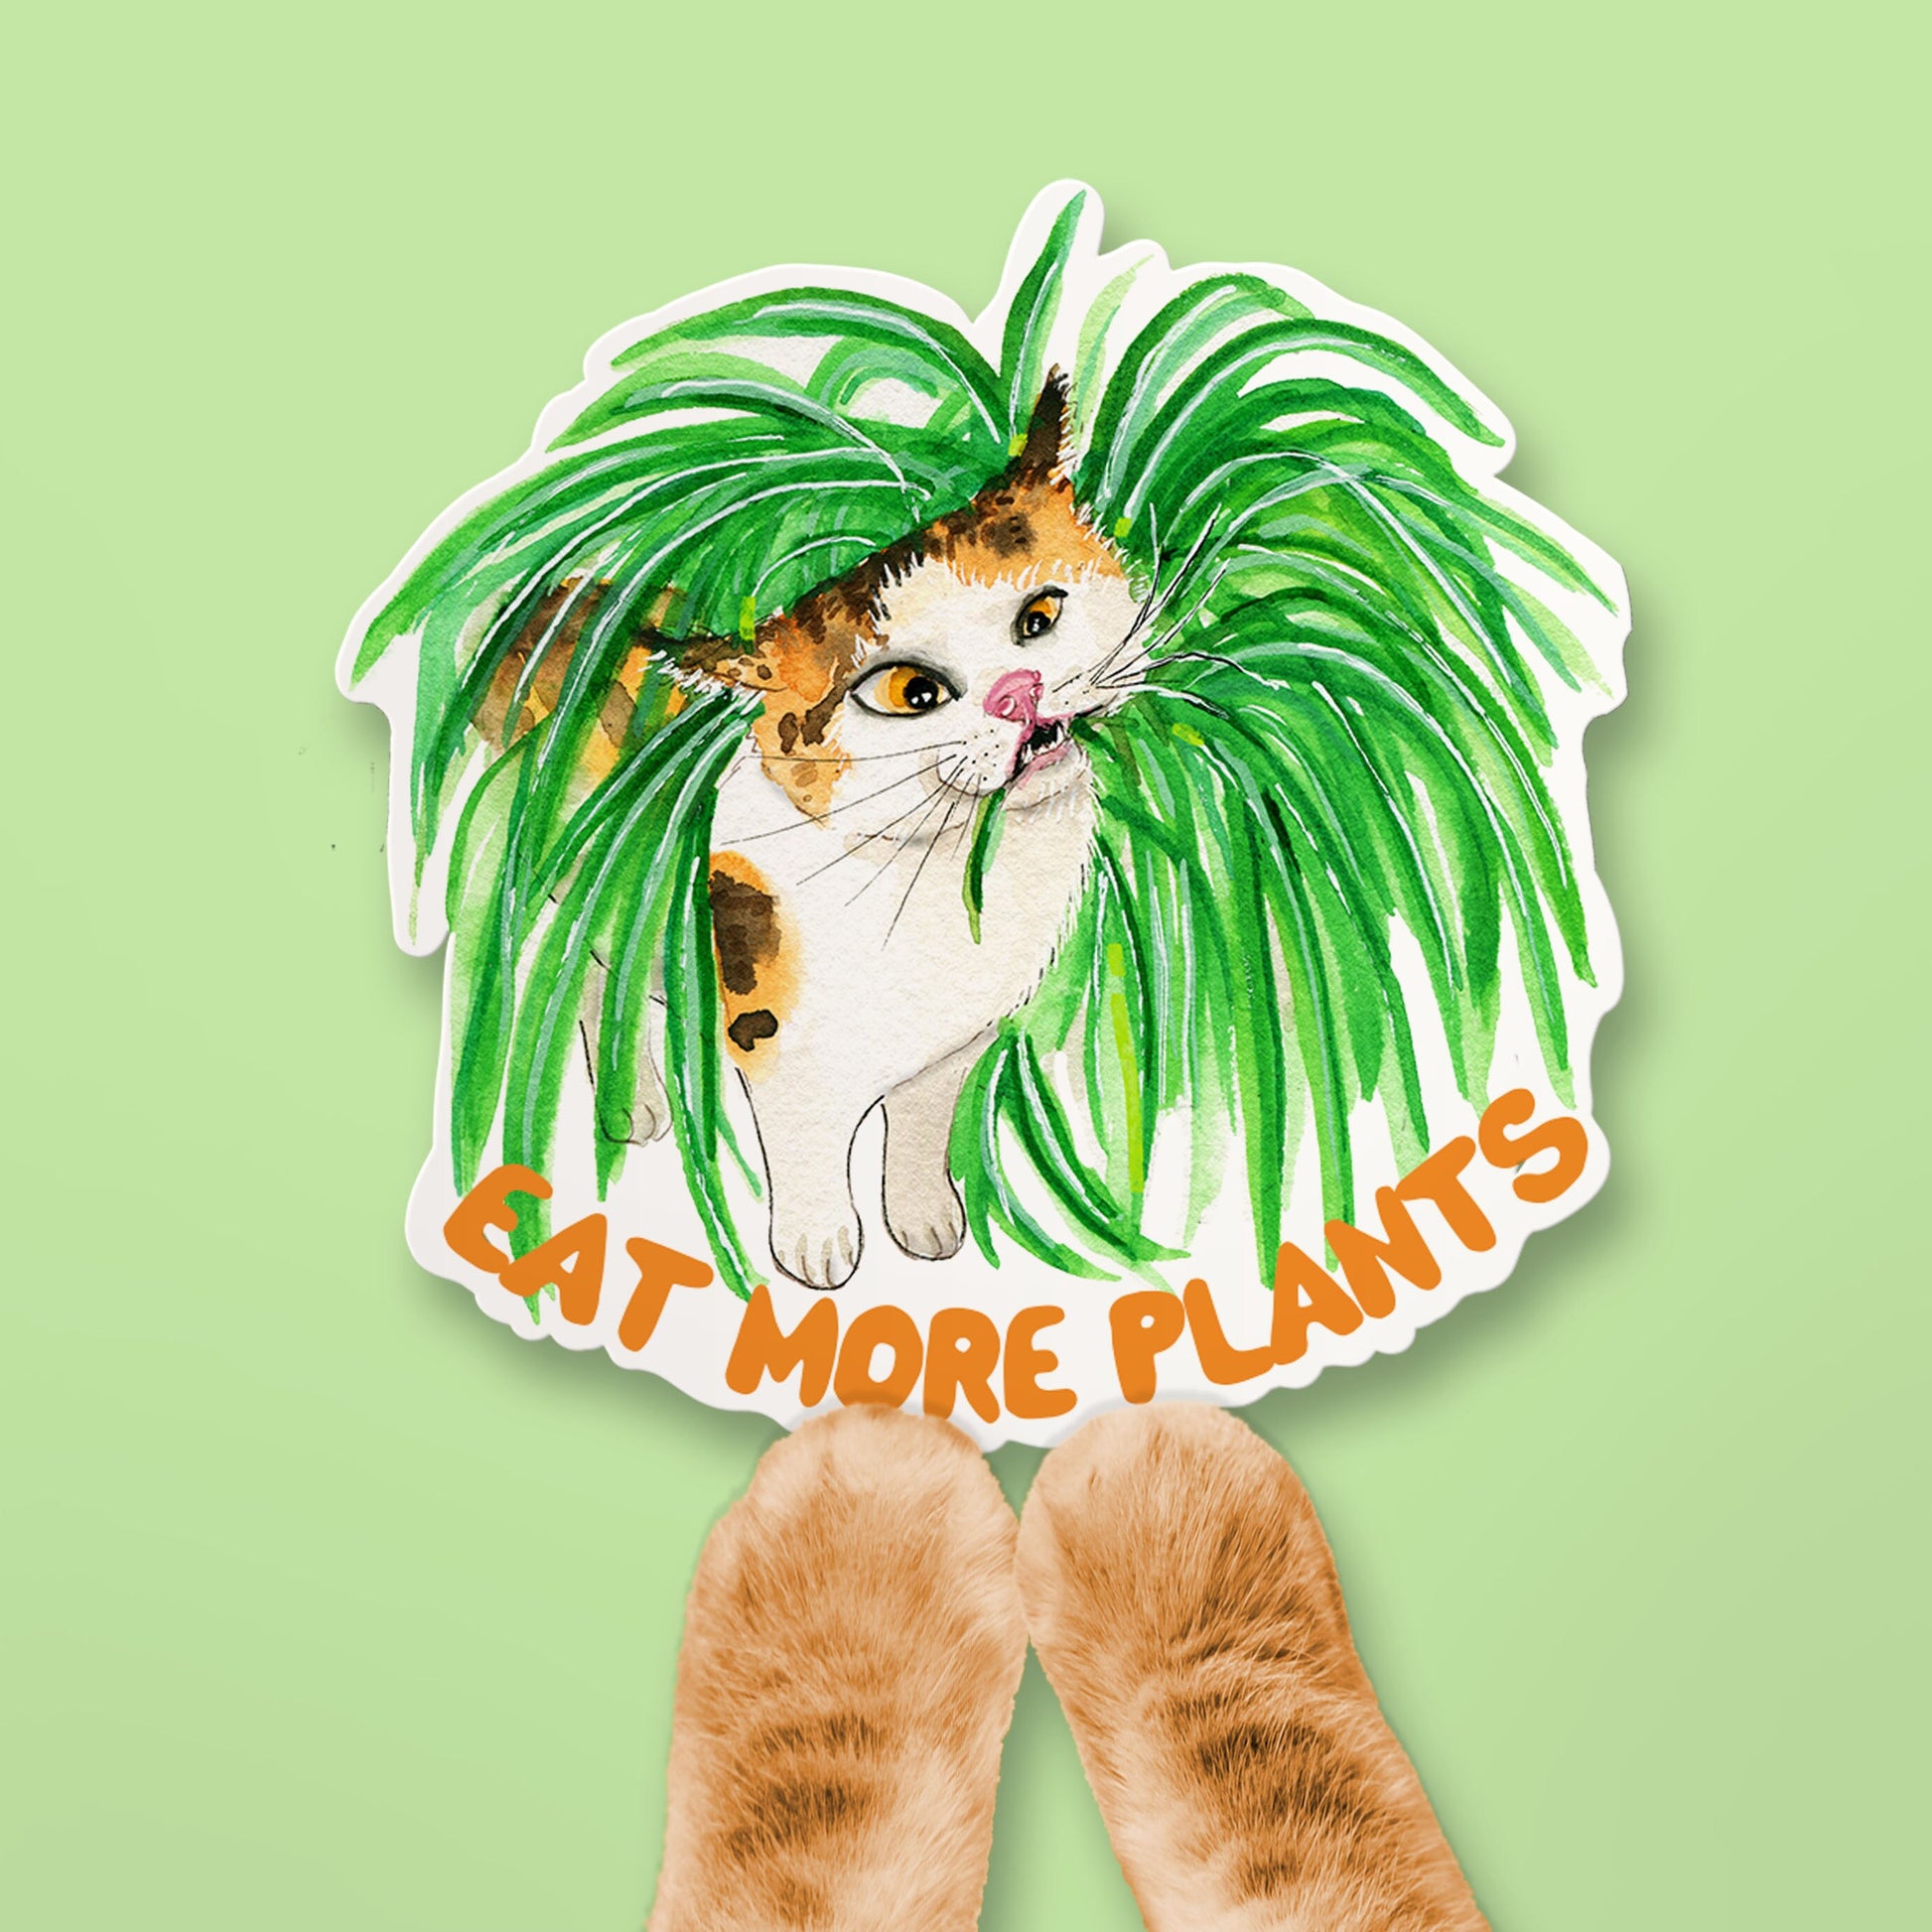 Eat More Plants Vegetarian Sticker For Plant Mom - Calico Cat Funny Waterproof Stickers For Vegan